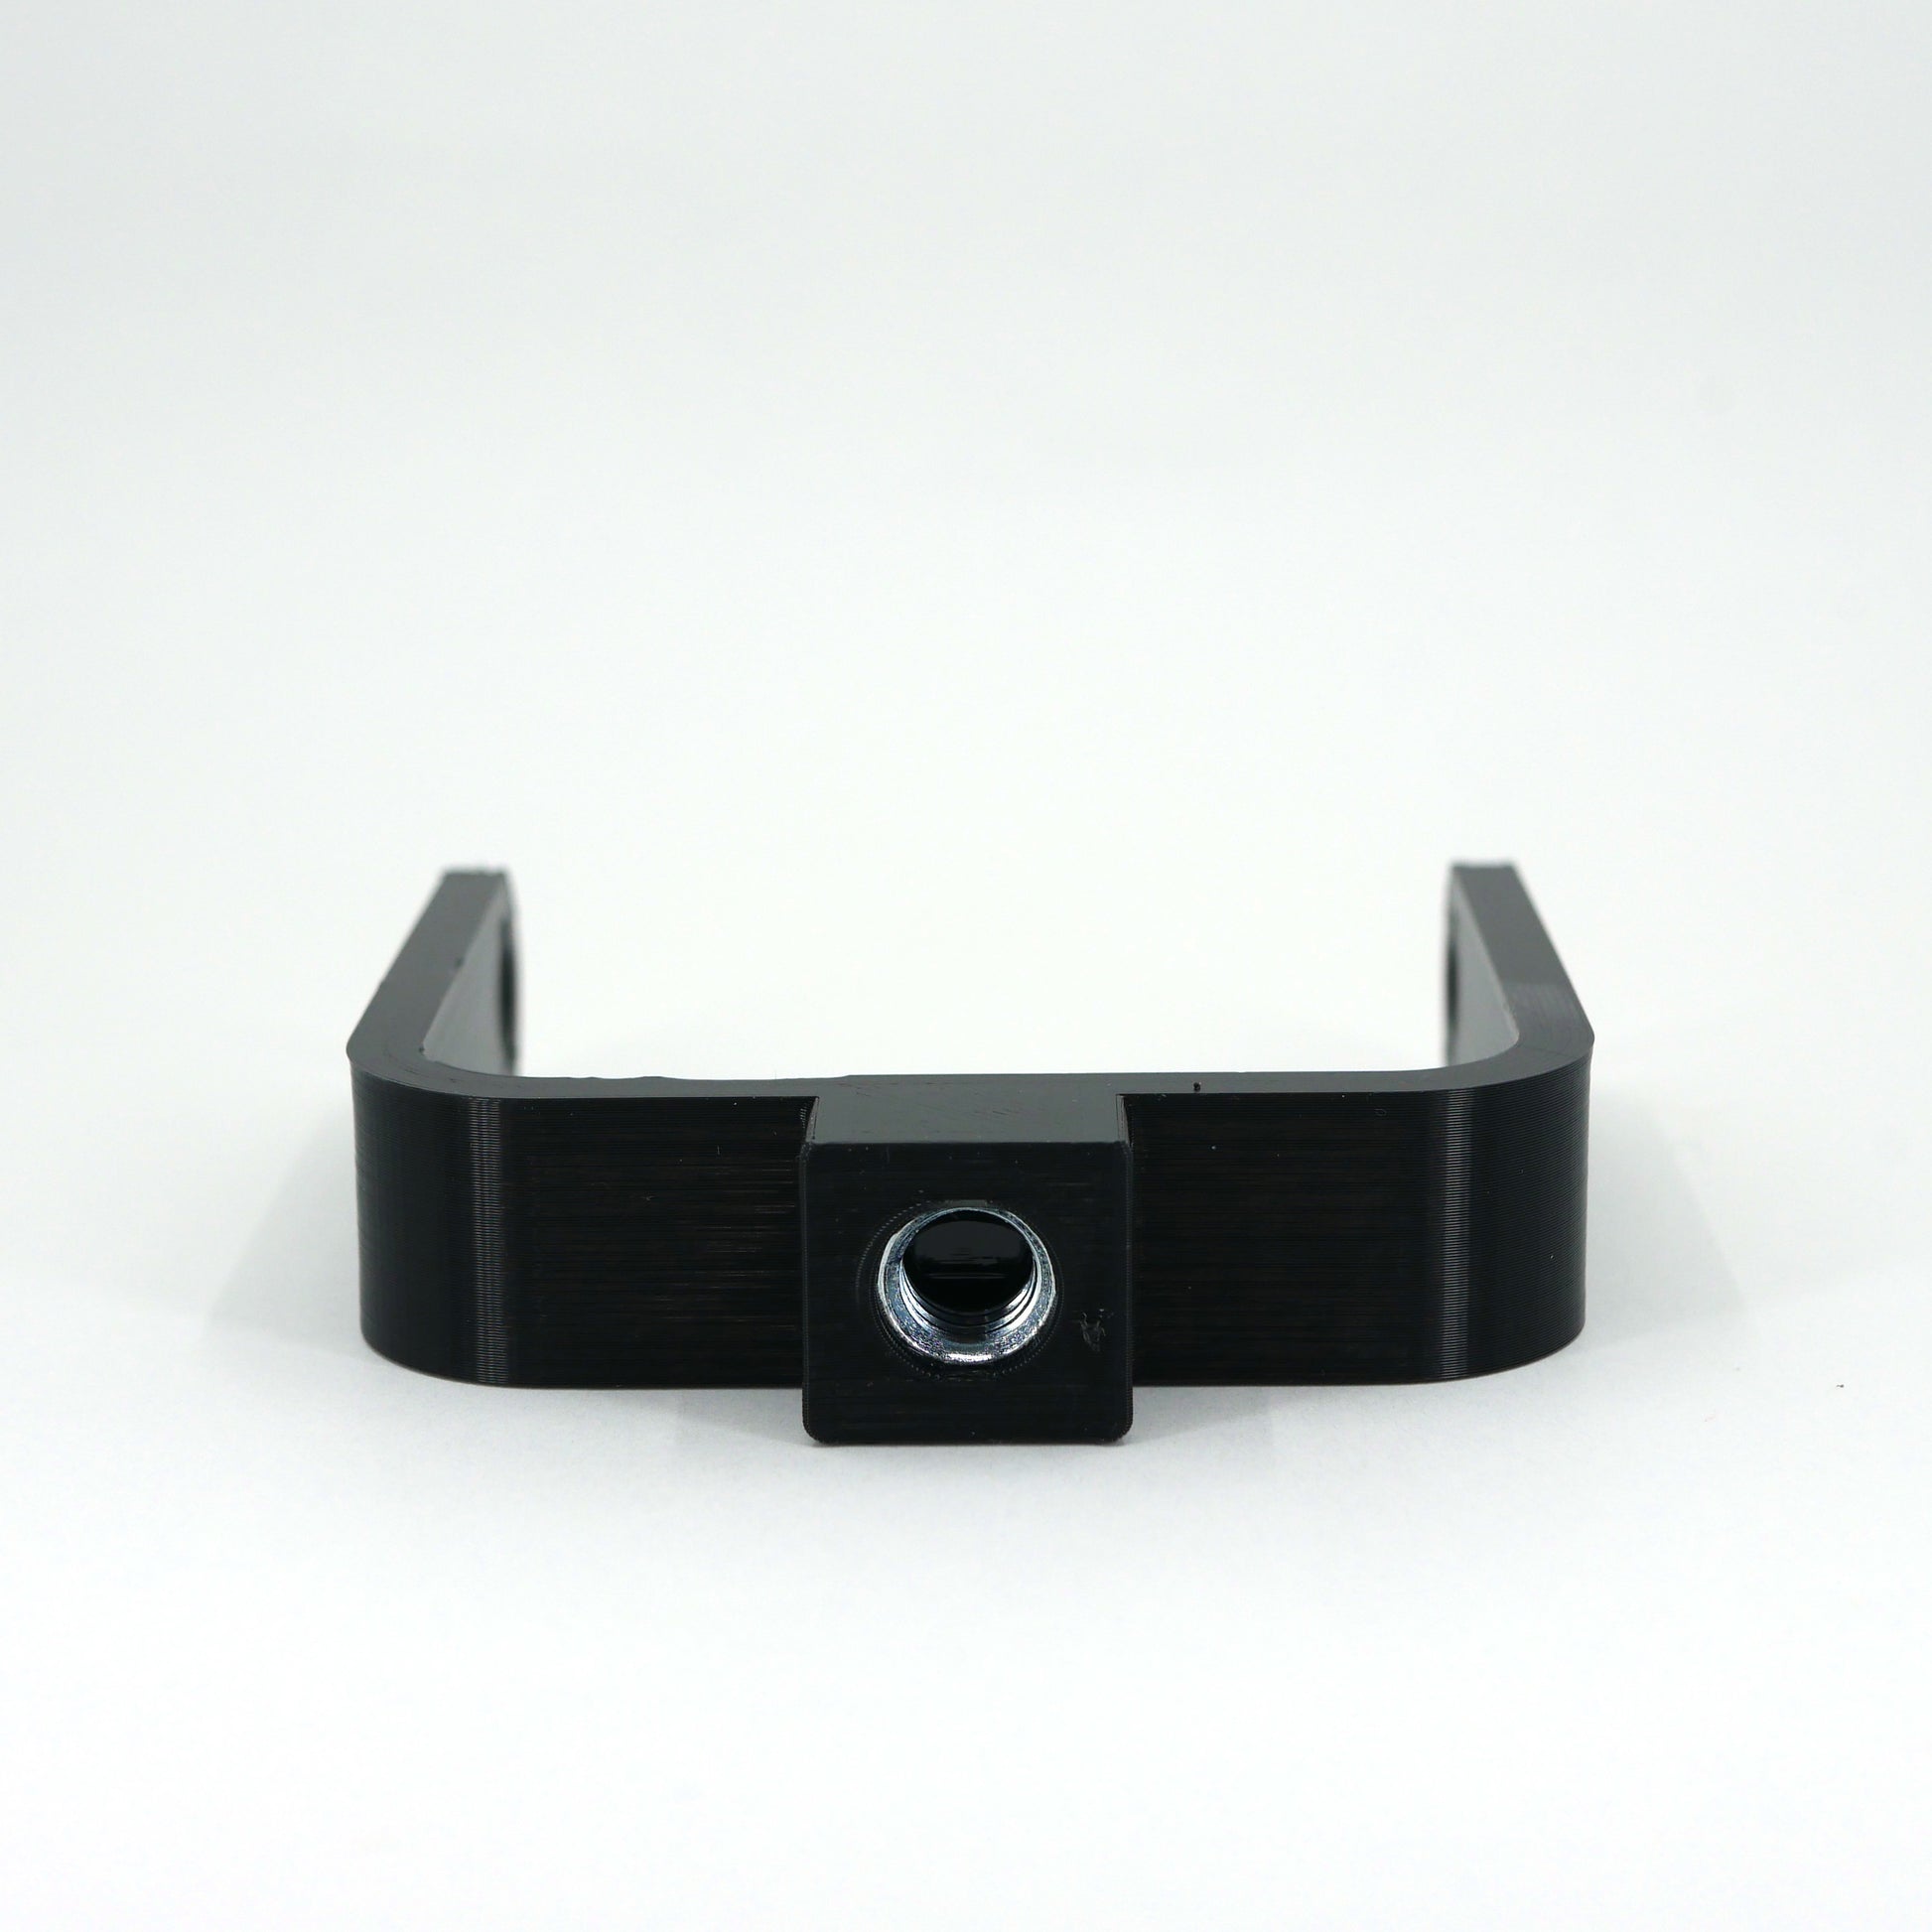 The back of a black microphone mount for the FIFINE K690 microphone.